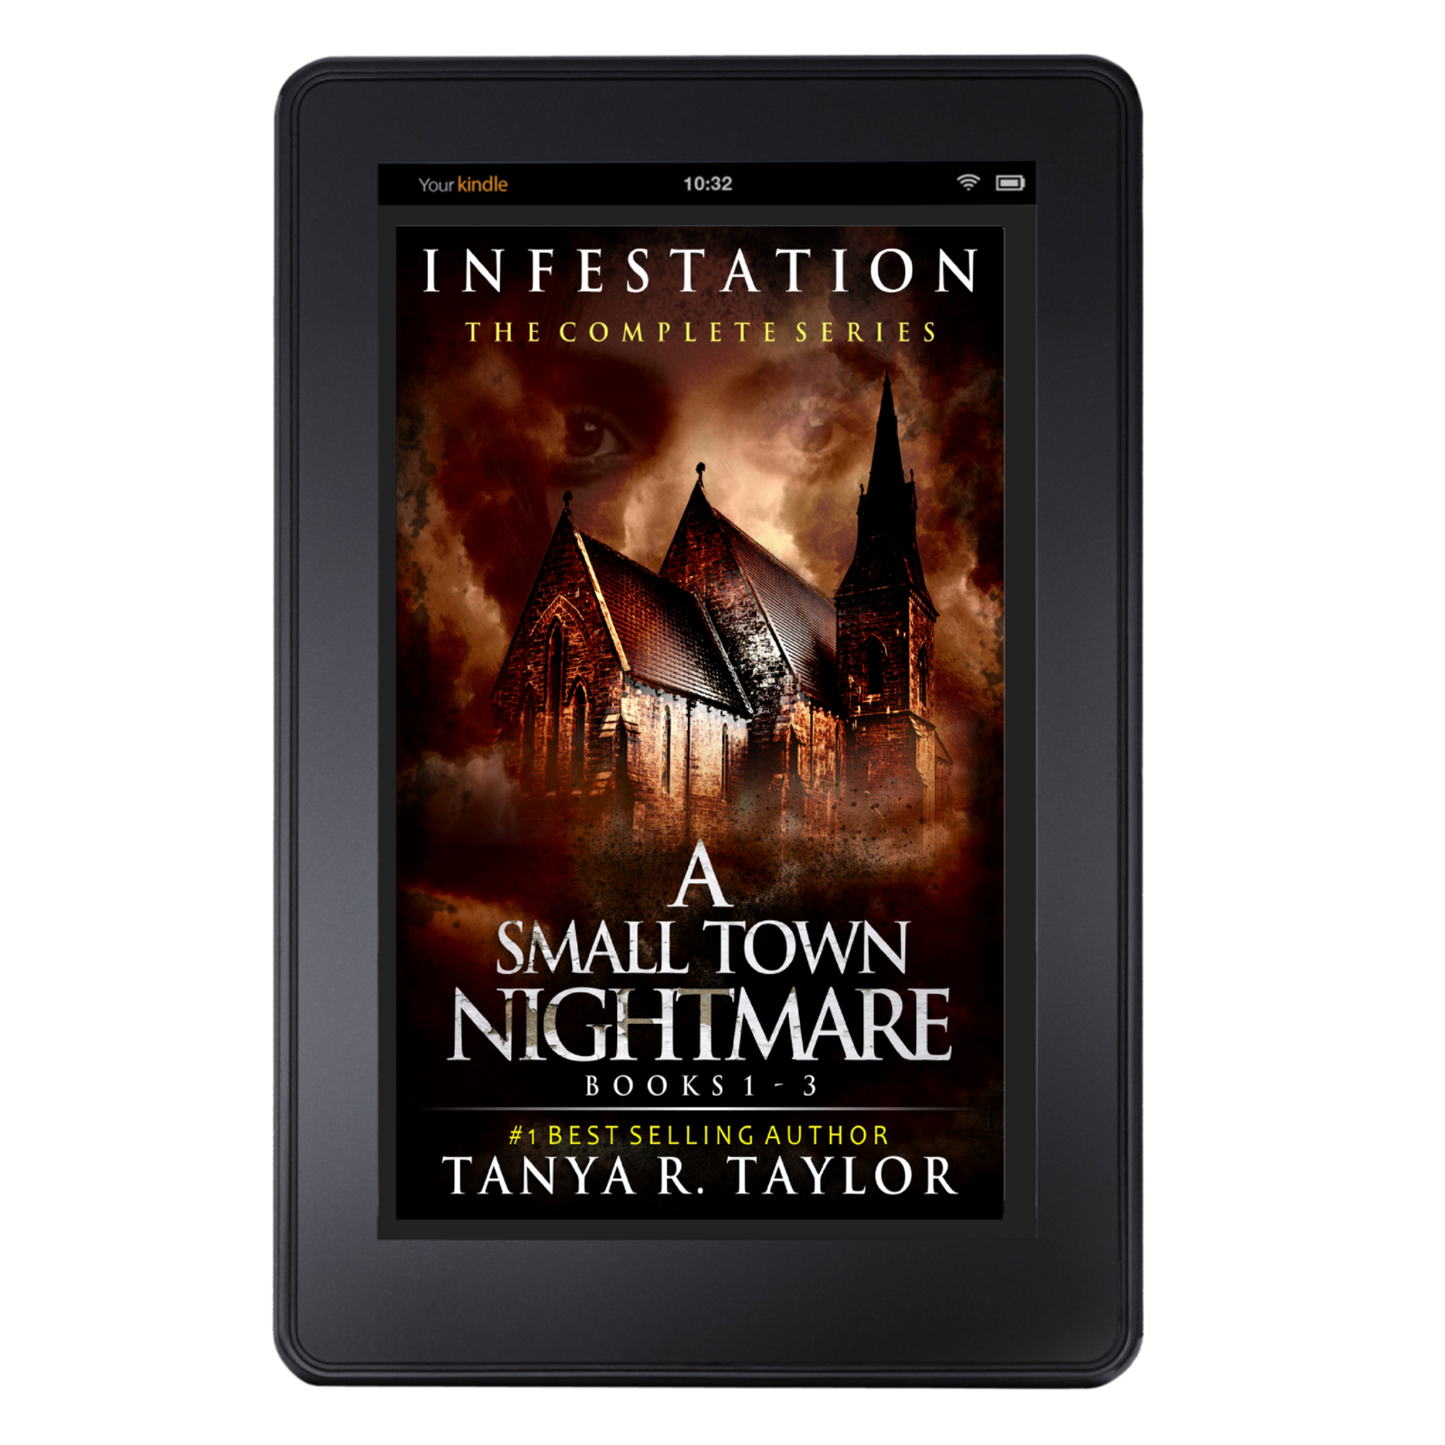 (Ebook) INFESTATION: A Small Town Nightmare (THE COMPLETE SERIES) Books 1 - 3